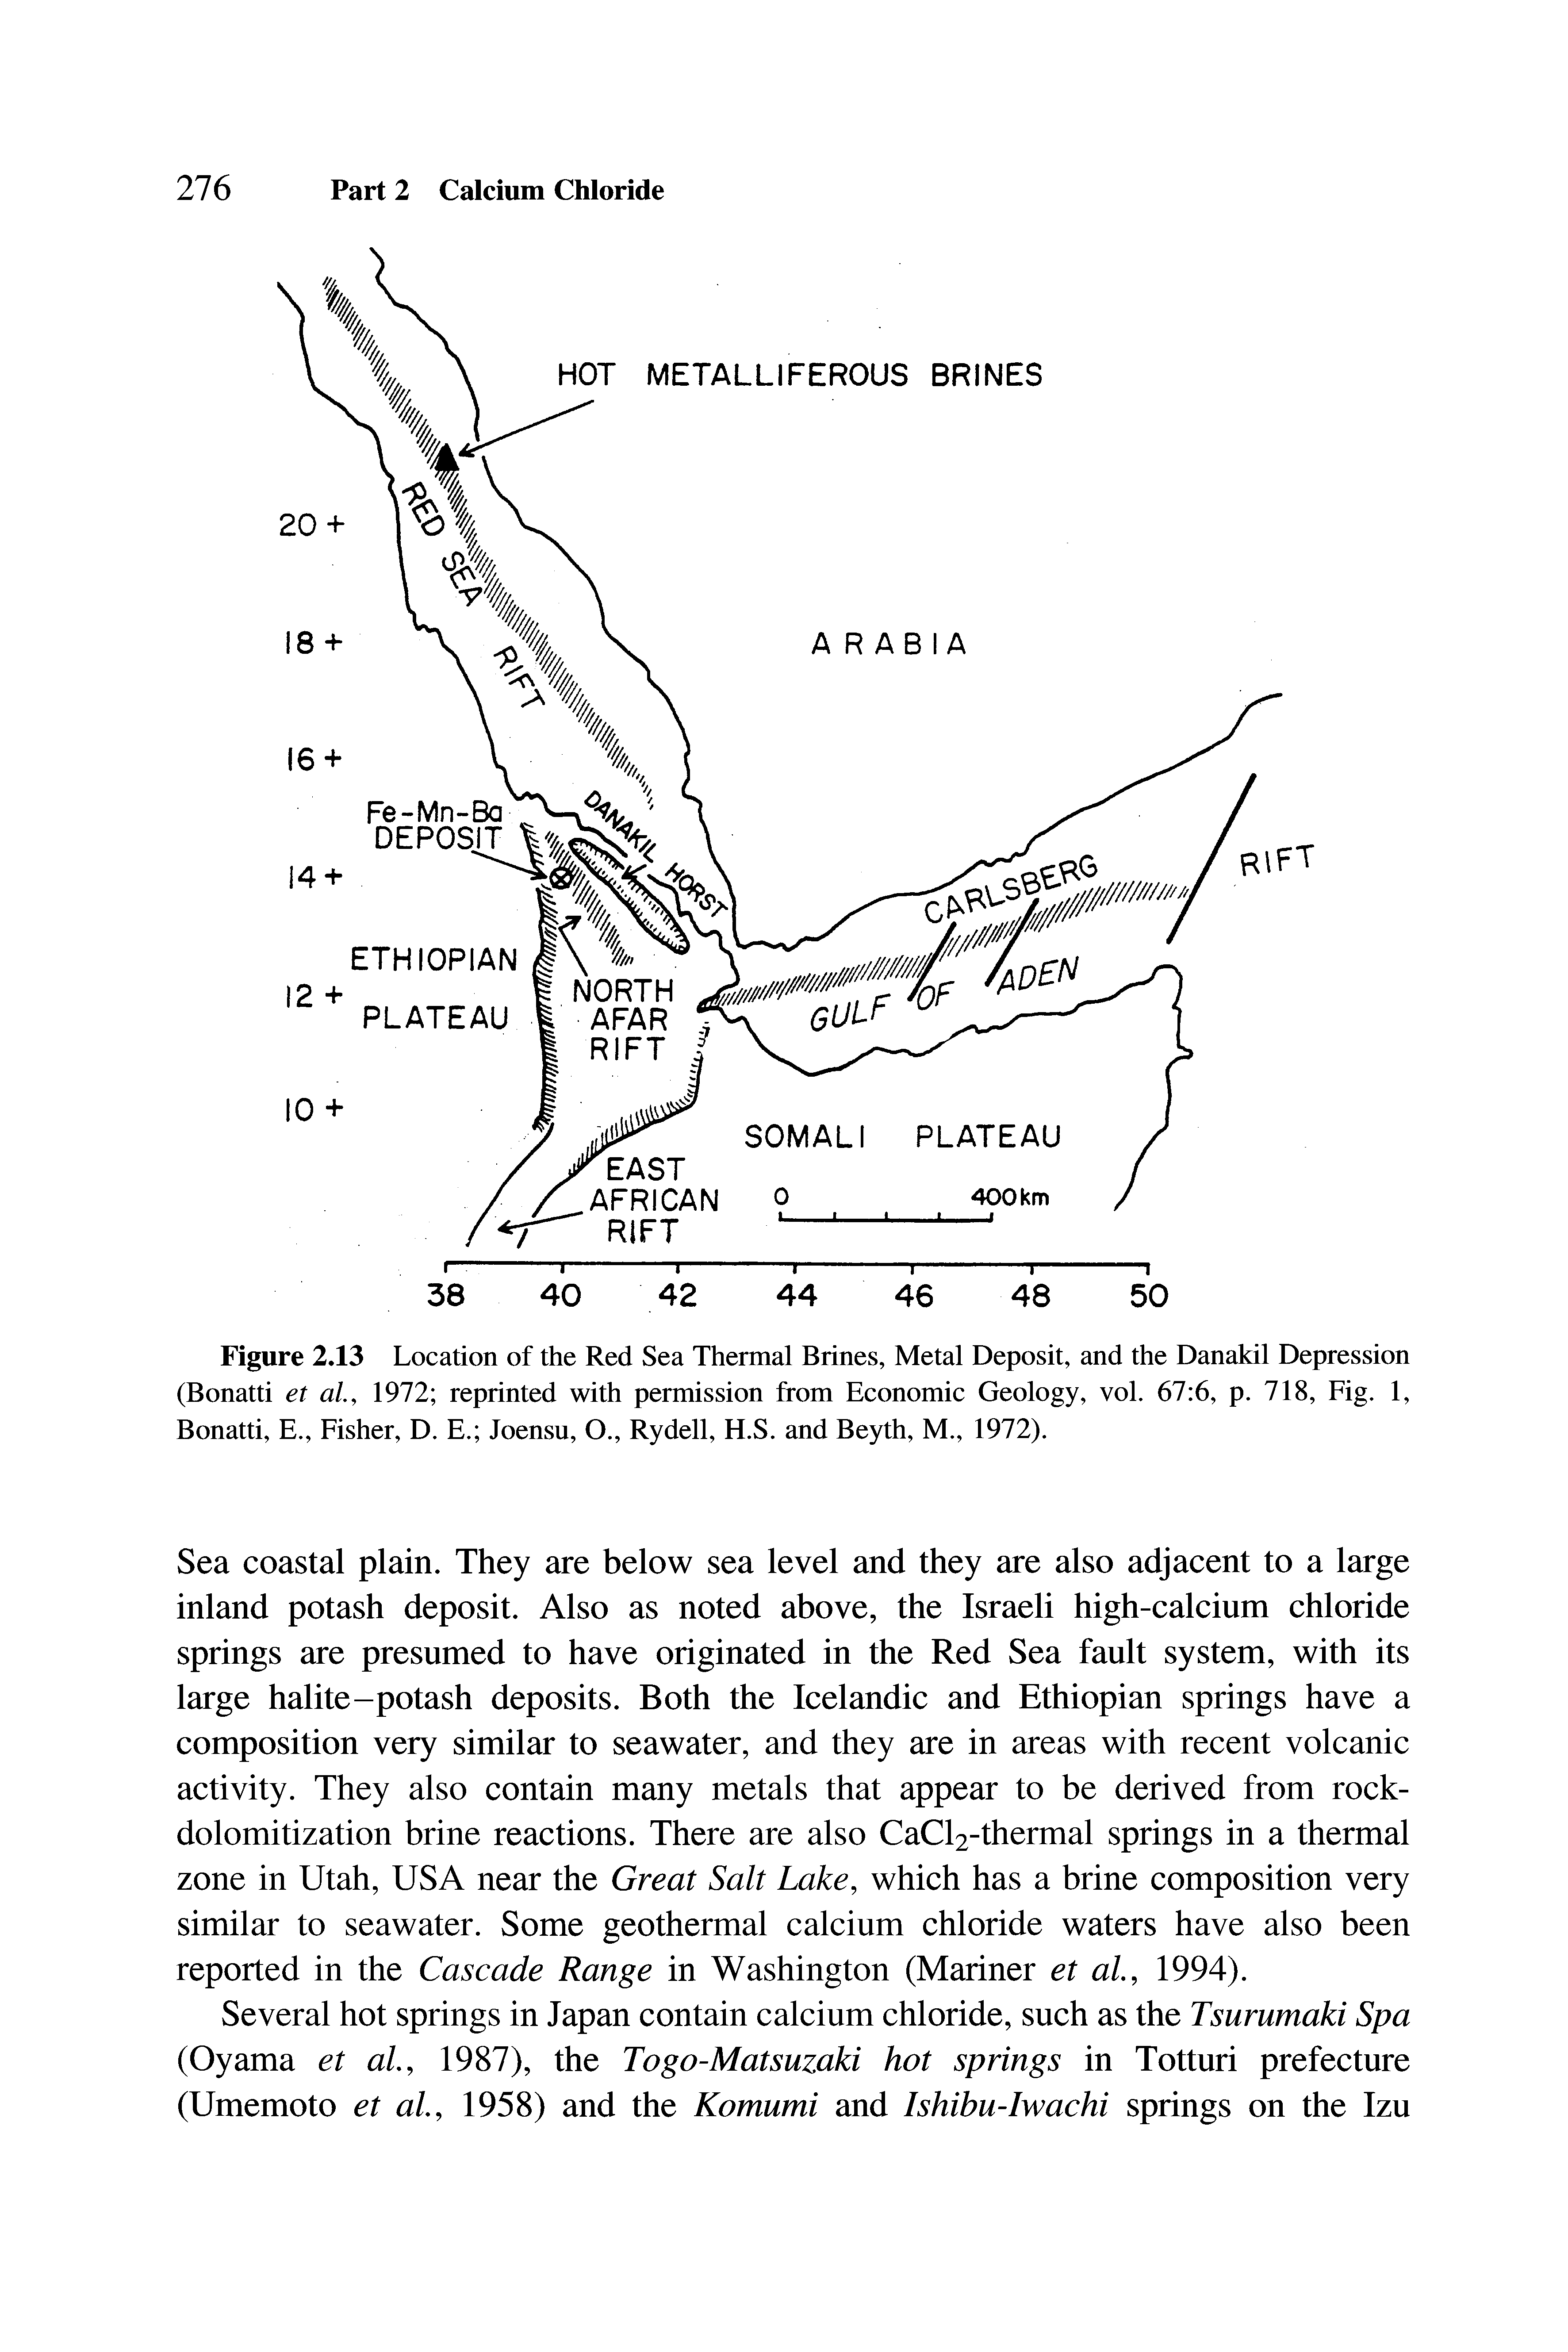 Figure 2.13 Location of the Red Sea Thermal Brines, Metal Deposit, and the Danakil Depression (Bonatti et al, 1972 reprinted with permission from Economic Geology, vol. 67 6, p. 718, Fig. 1, Bonatti, E., Fisher, D. E. Joensu, O., Rydell, H.S. and Beyth, M., 1972).